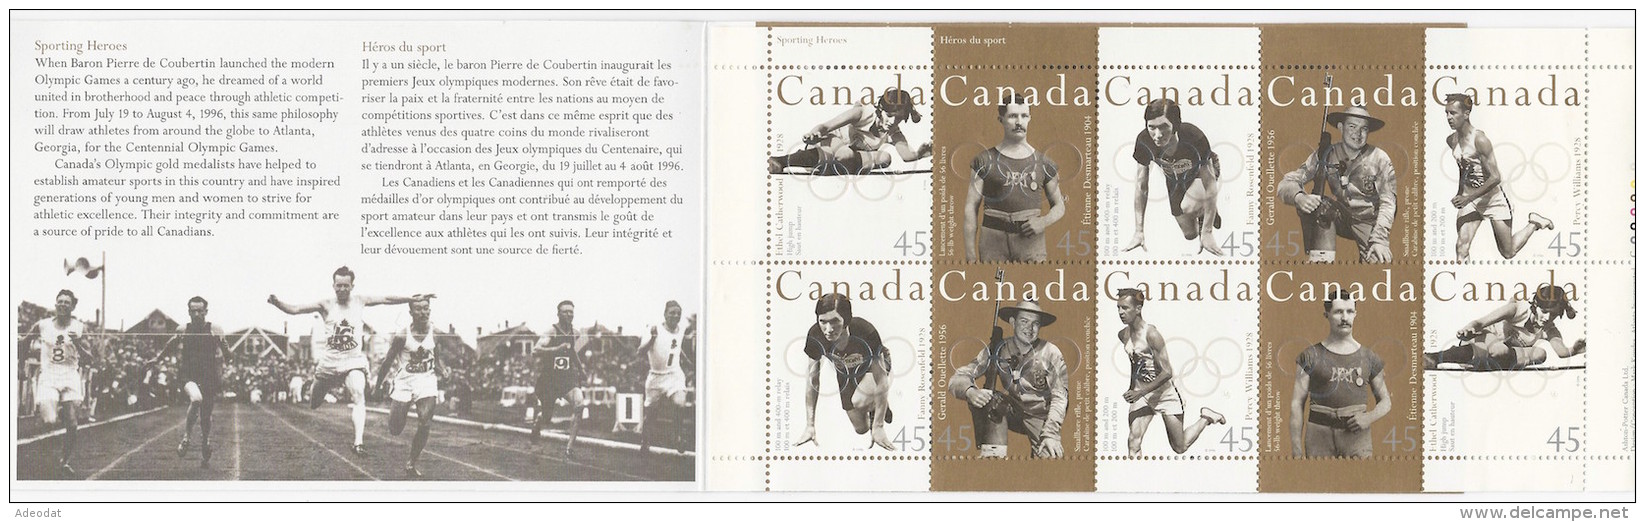 CANADA 1996 CANADIAN OLYMPIC GOLD MEDALISTS SCOTT 1612b BOOKLET PANE OF 10 VALUE US  $11.25 - Heftchenblätter